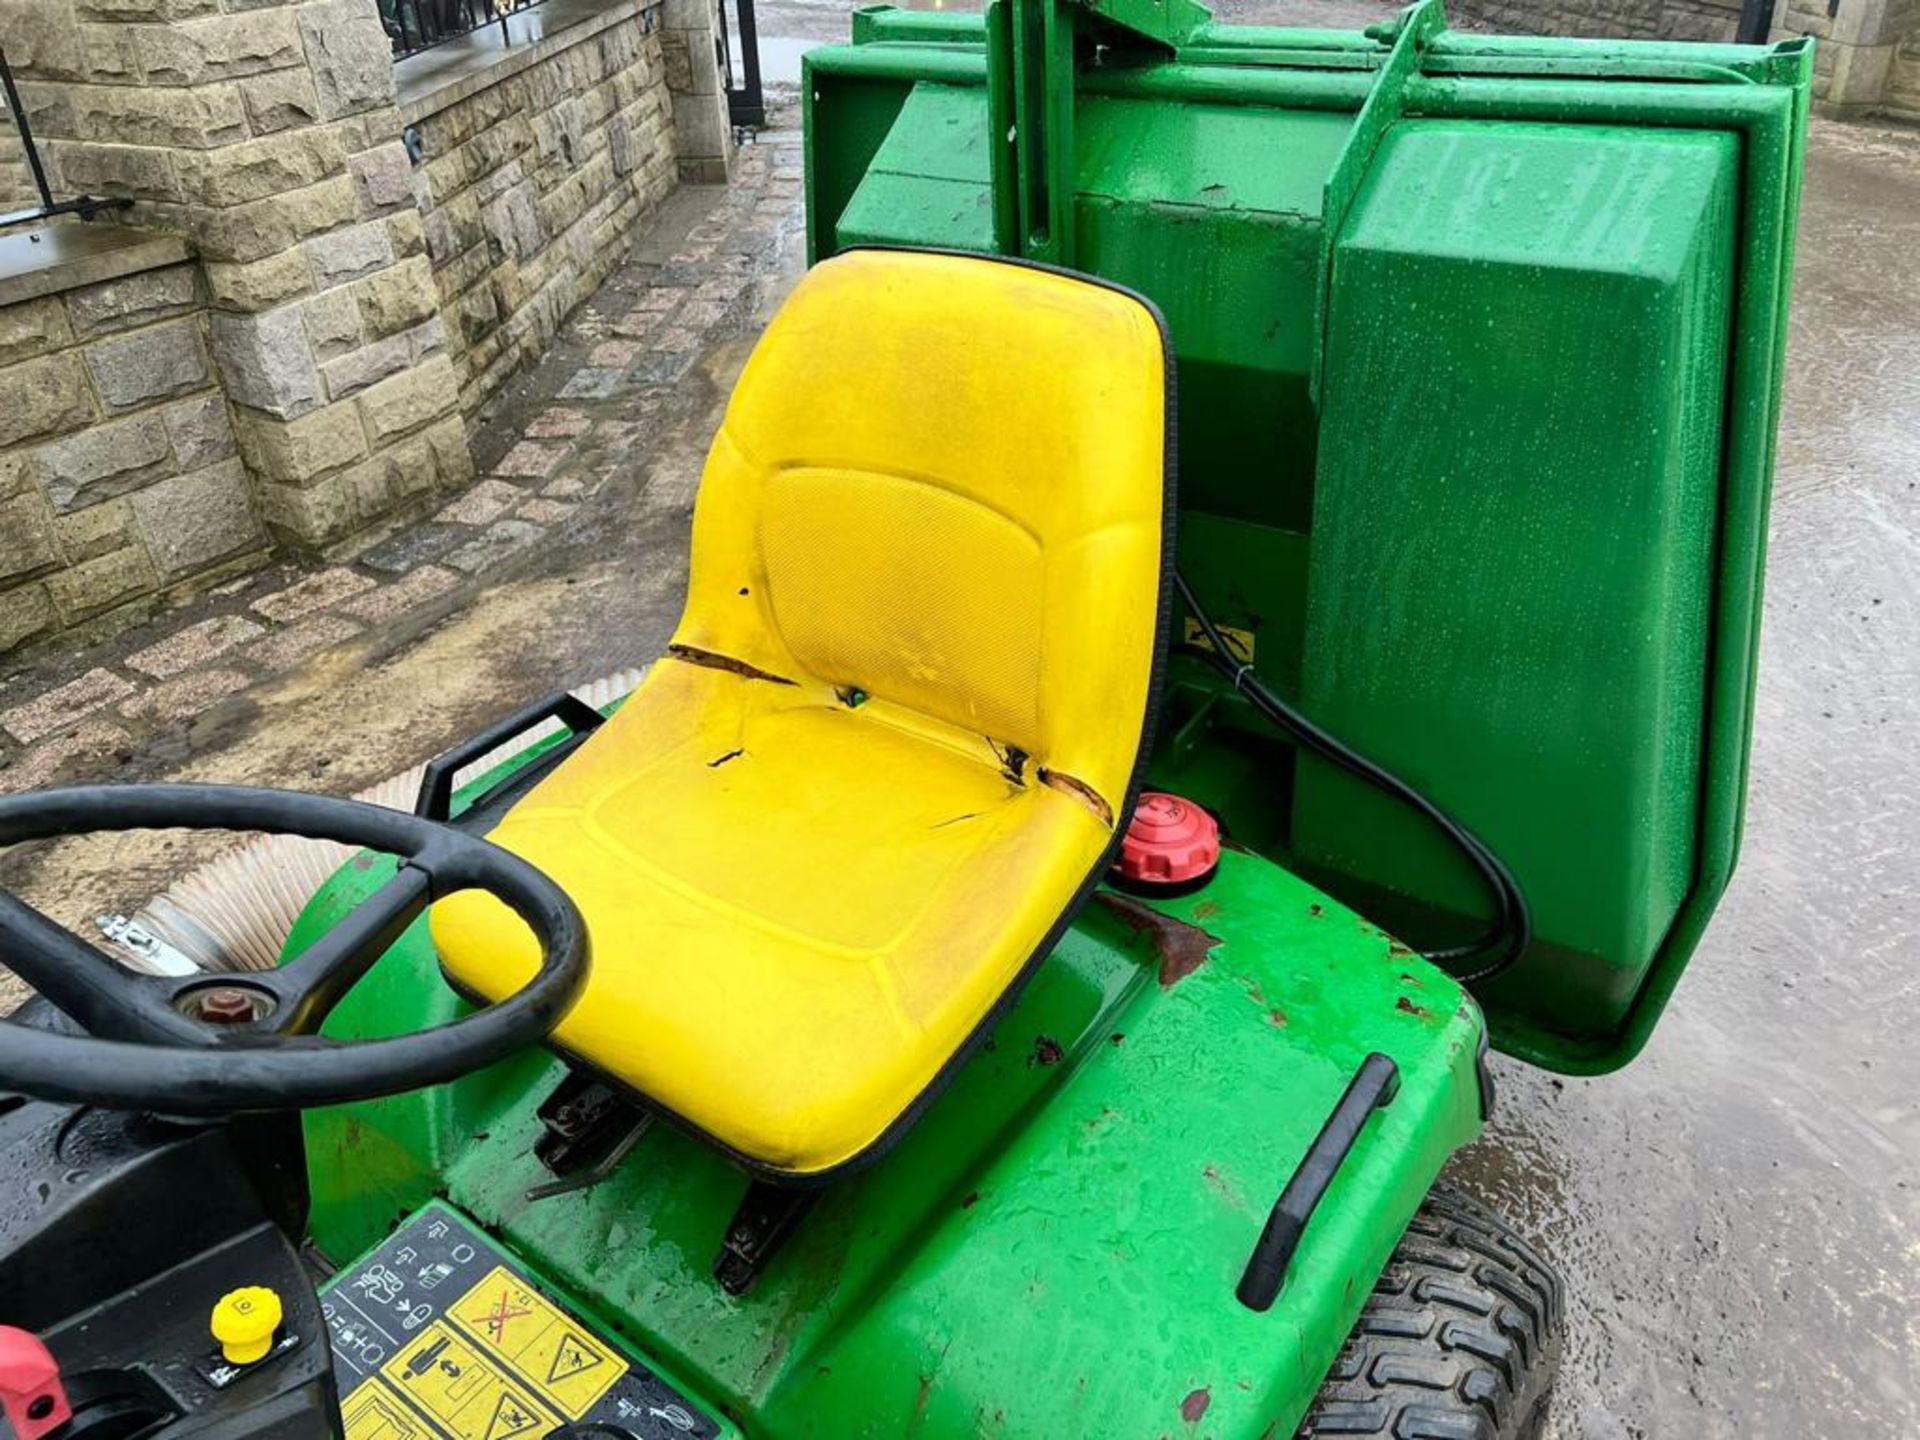 John Deere 455 22HP Diesel Compact Tractor/Ride On Mower With Clamshell Collector - Image 11 of 11